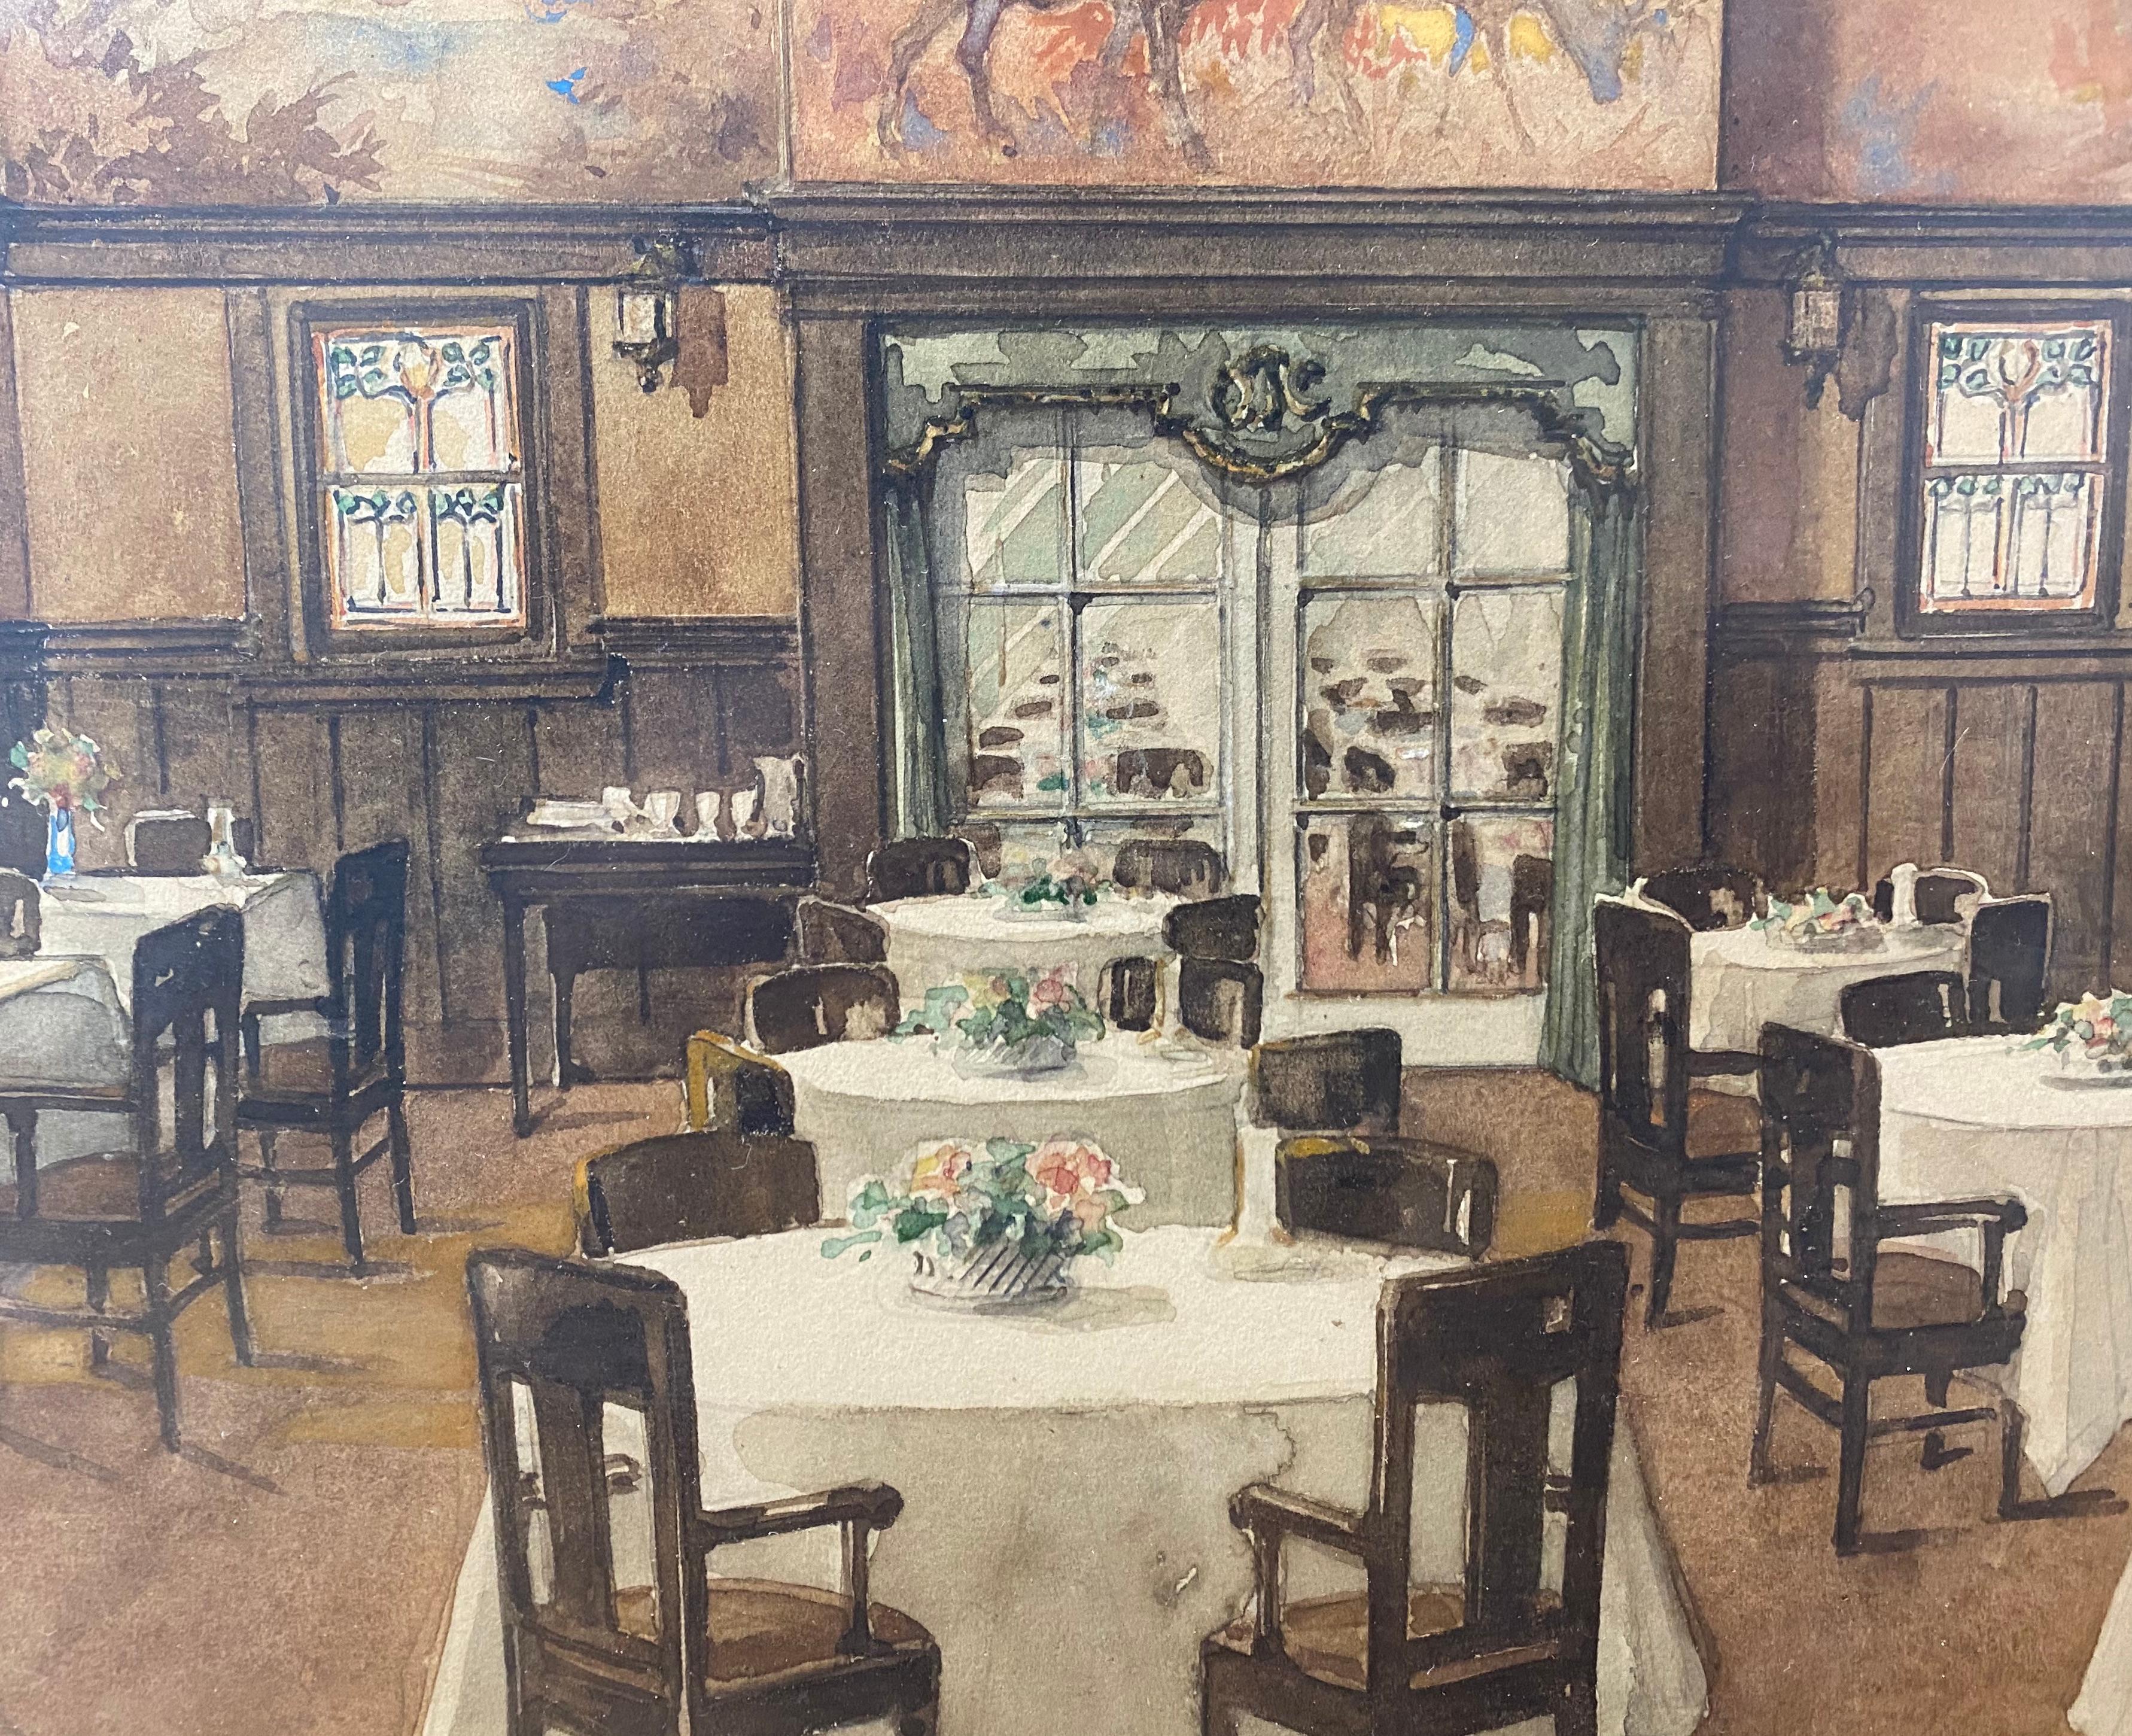 Exceptional Lodge Dining Room Interior Original Watercolor Early 20th C.

Original watercolor on paper

Dimensions 17.5